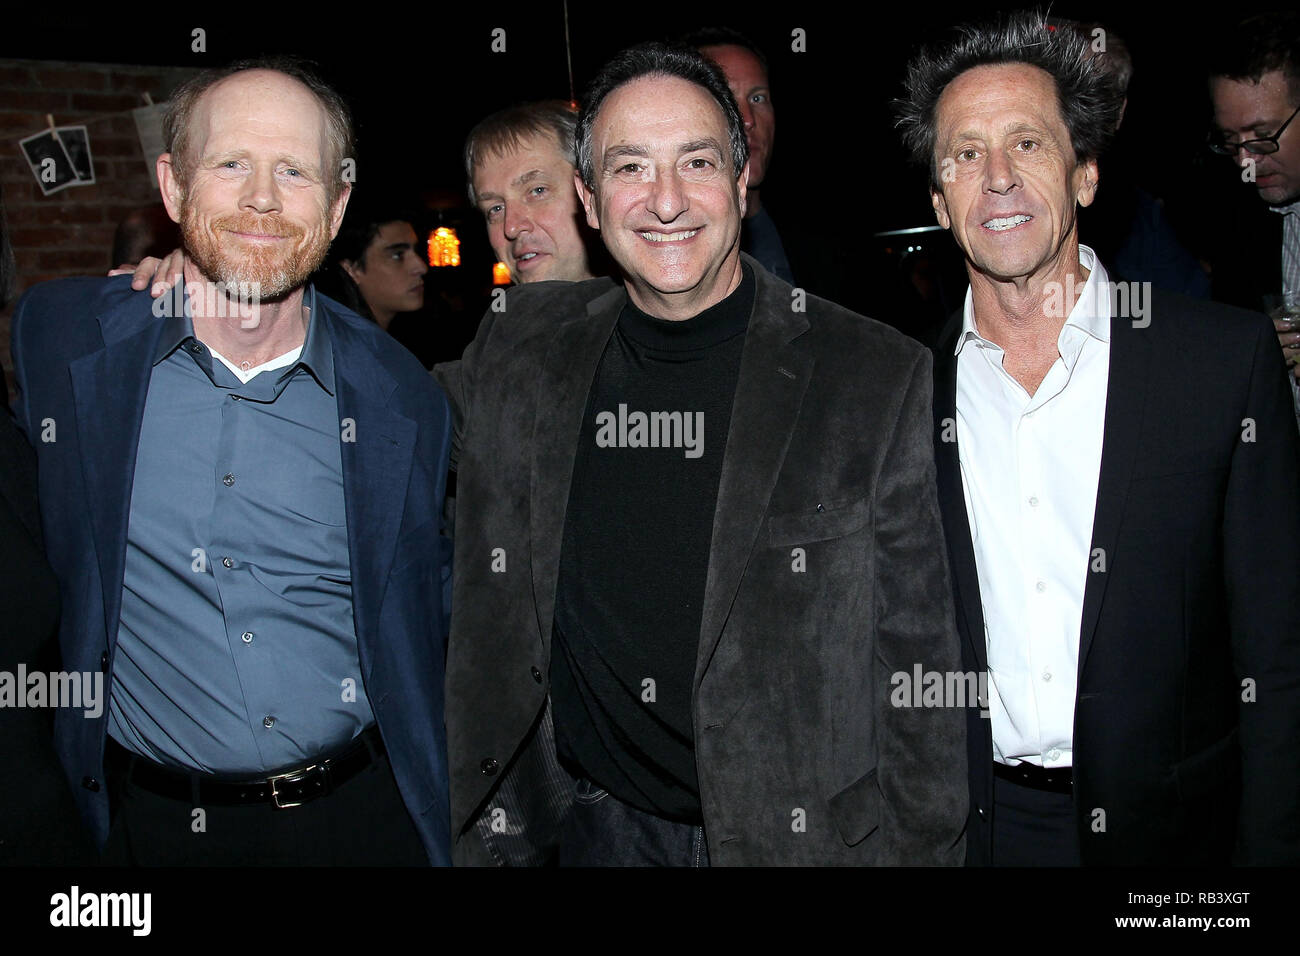 NEW YORK, NY - APRIL 30:  Director Ron Howard, journalist Ira Flatow and producer Brian Grazer attend 'A Beautiful Mind' Reception during the 10th annual Tribeca Film Festival at The Chelsea Room on April 30, 2011 in New York City.  (Photo by Steve Mack/S.D. Mack Pictures) Stock Photo